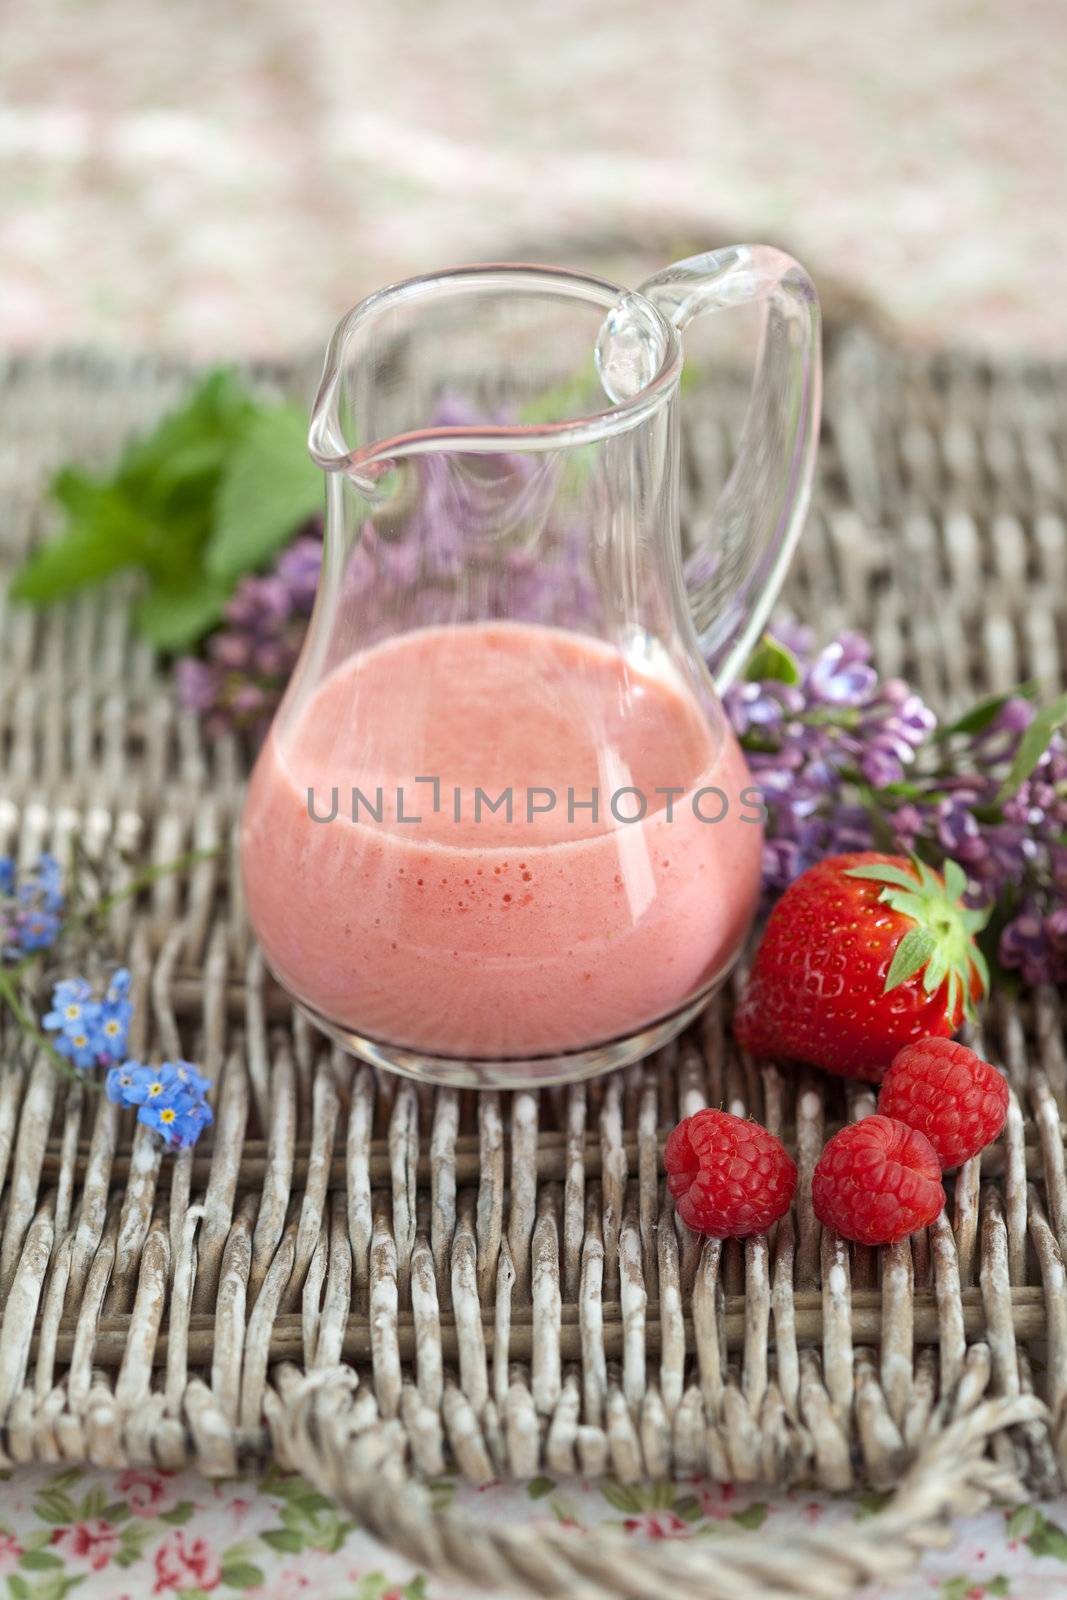 Delicious smoothie with strawberries and raspberries